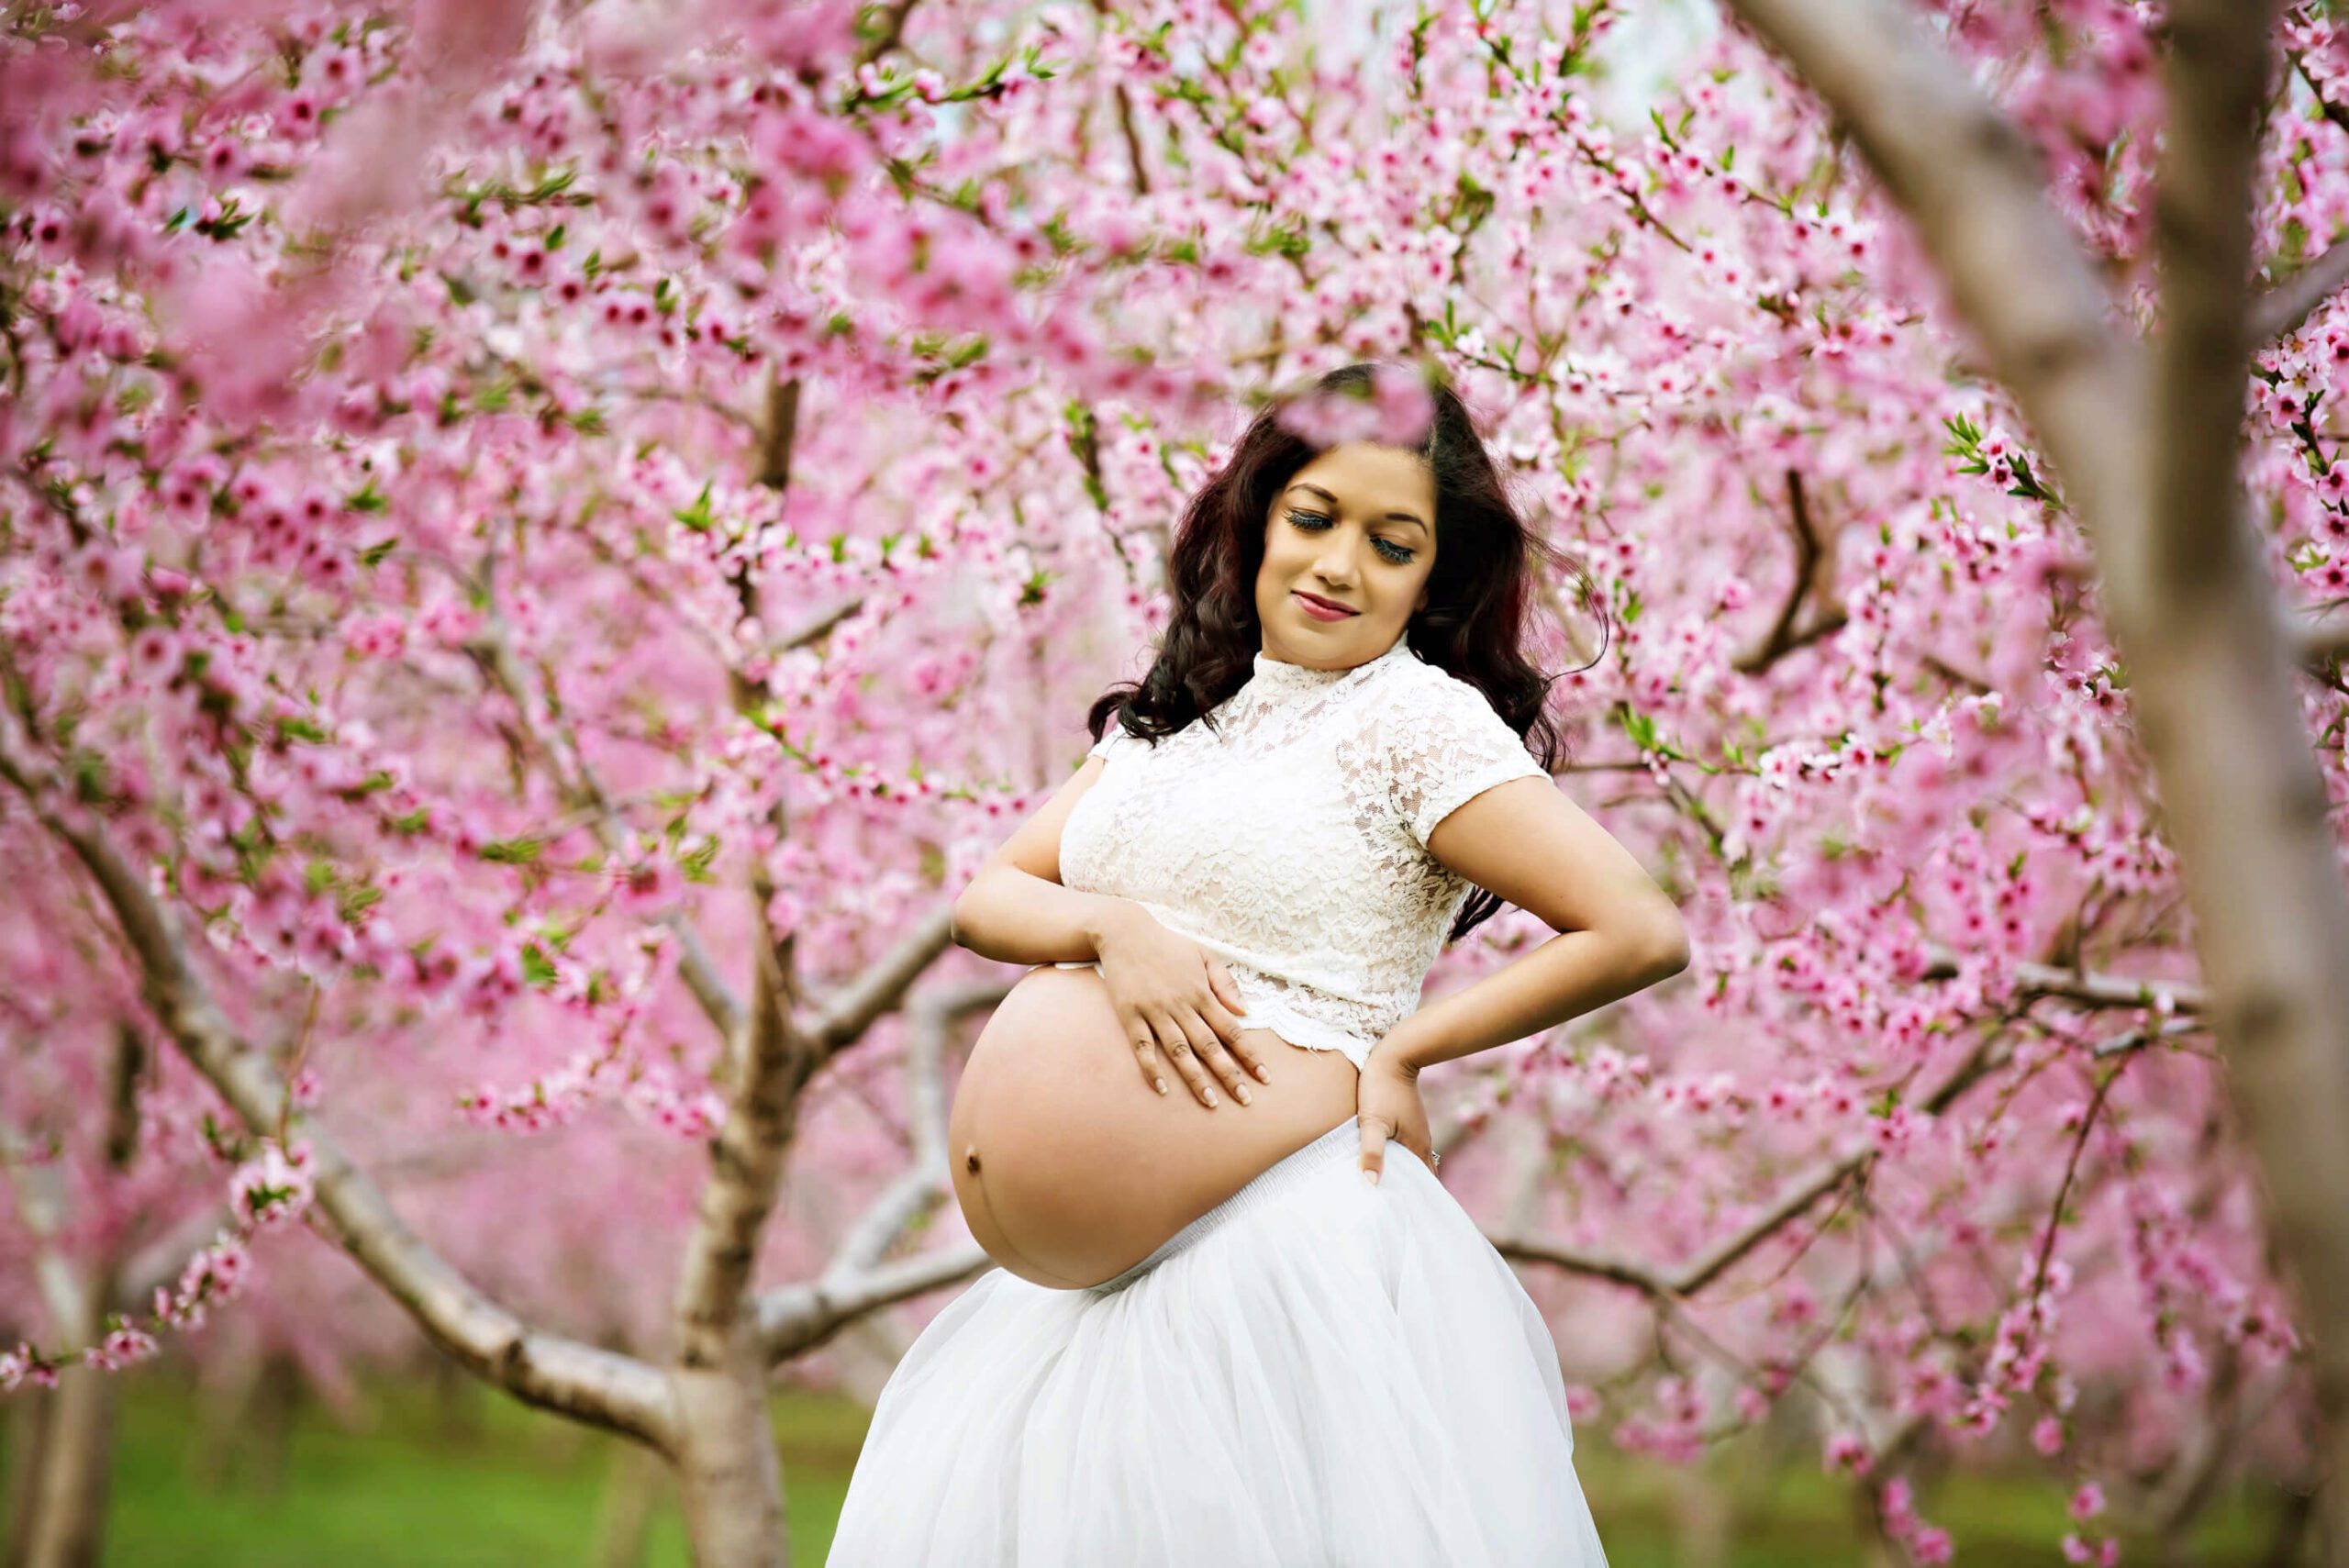 Pregnant woman wearing a lace white crop top and grey tutu for her maternity photography session.